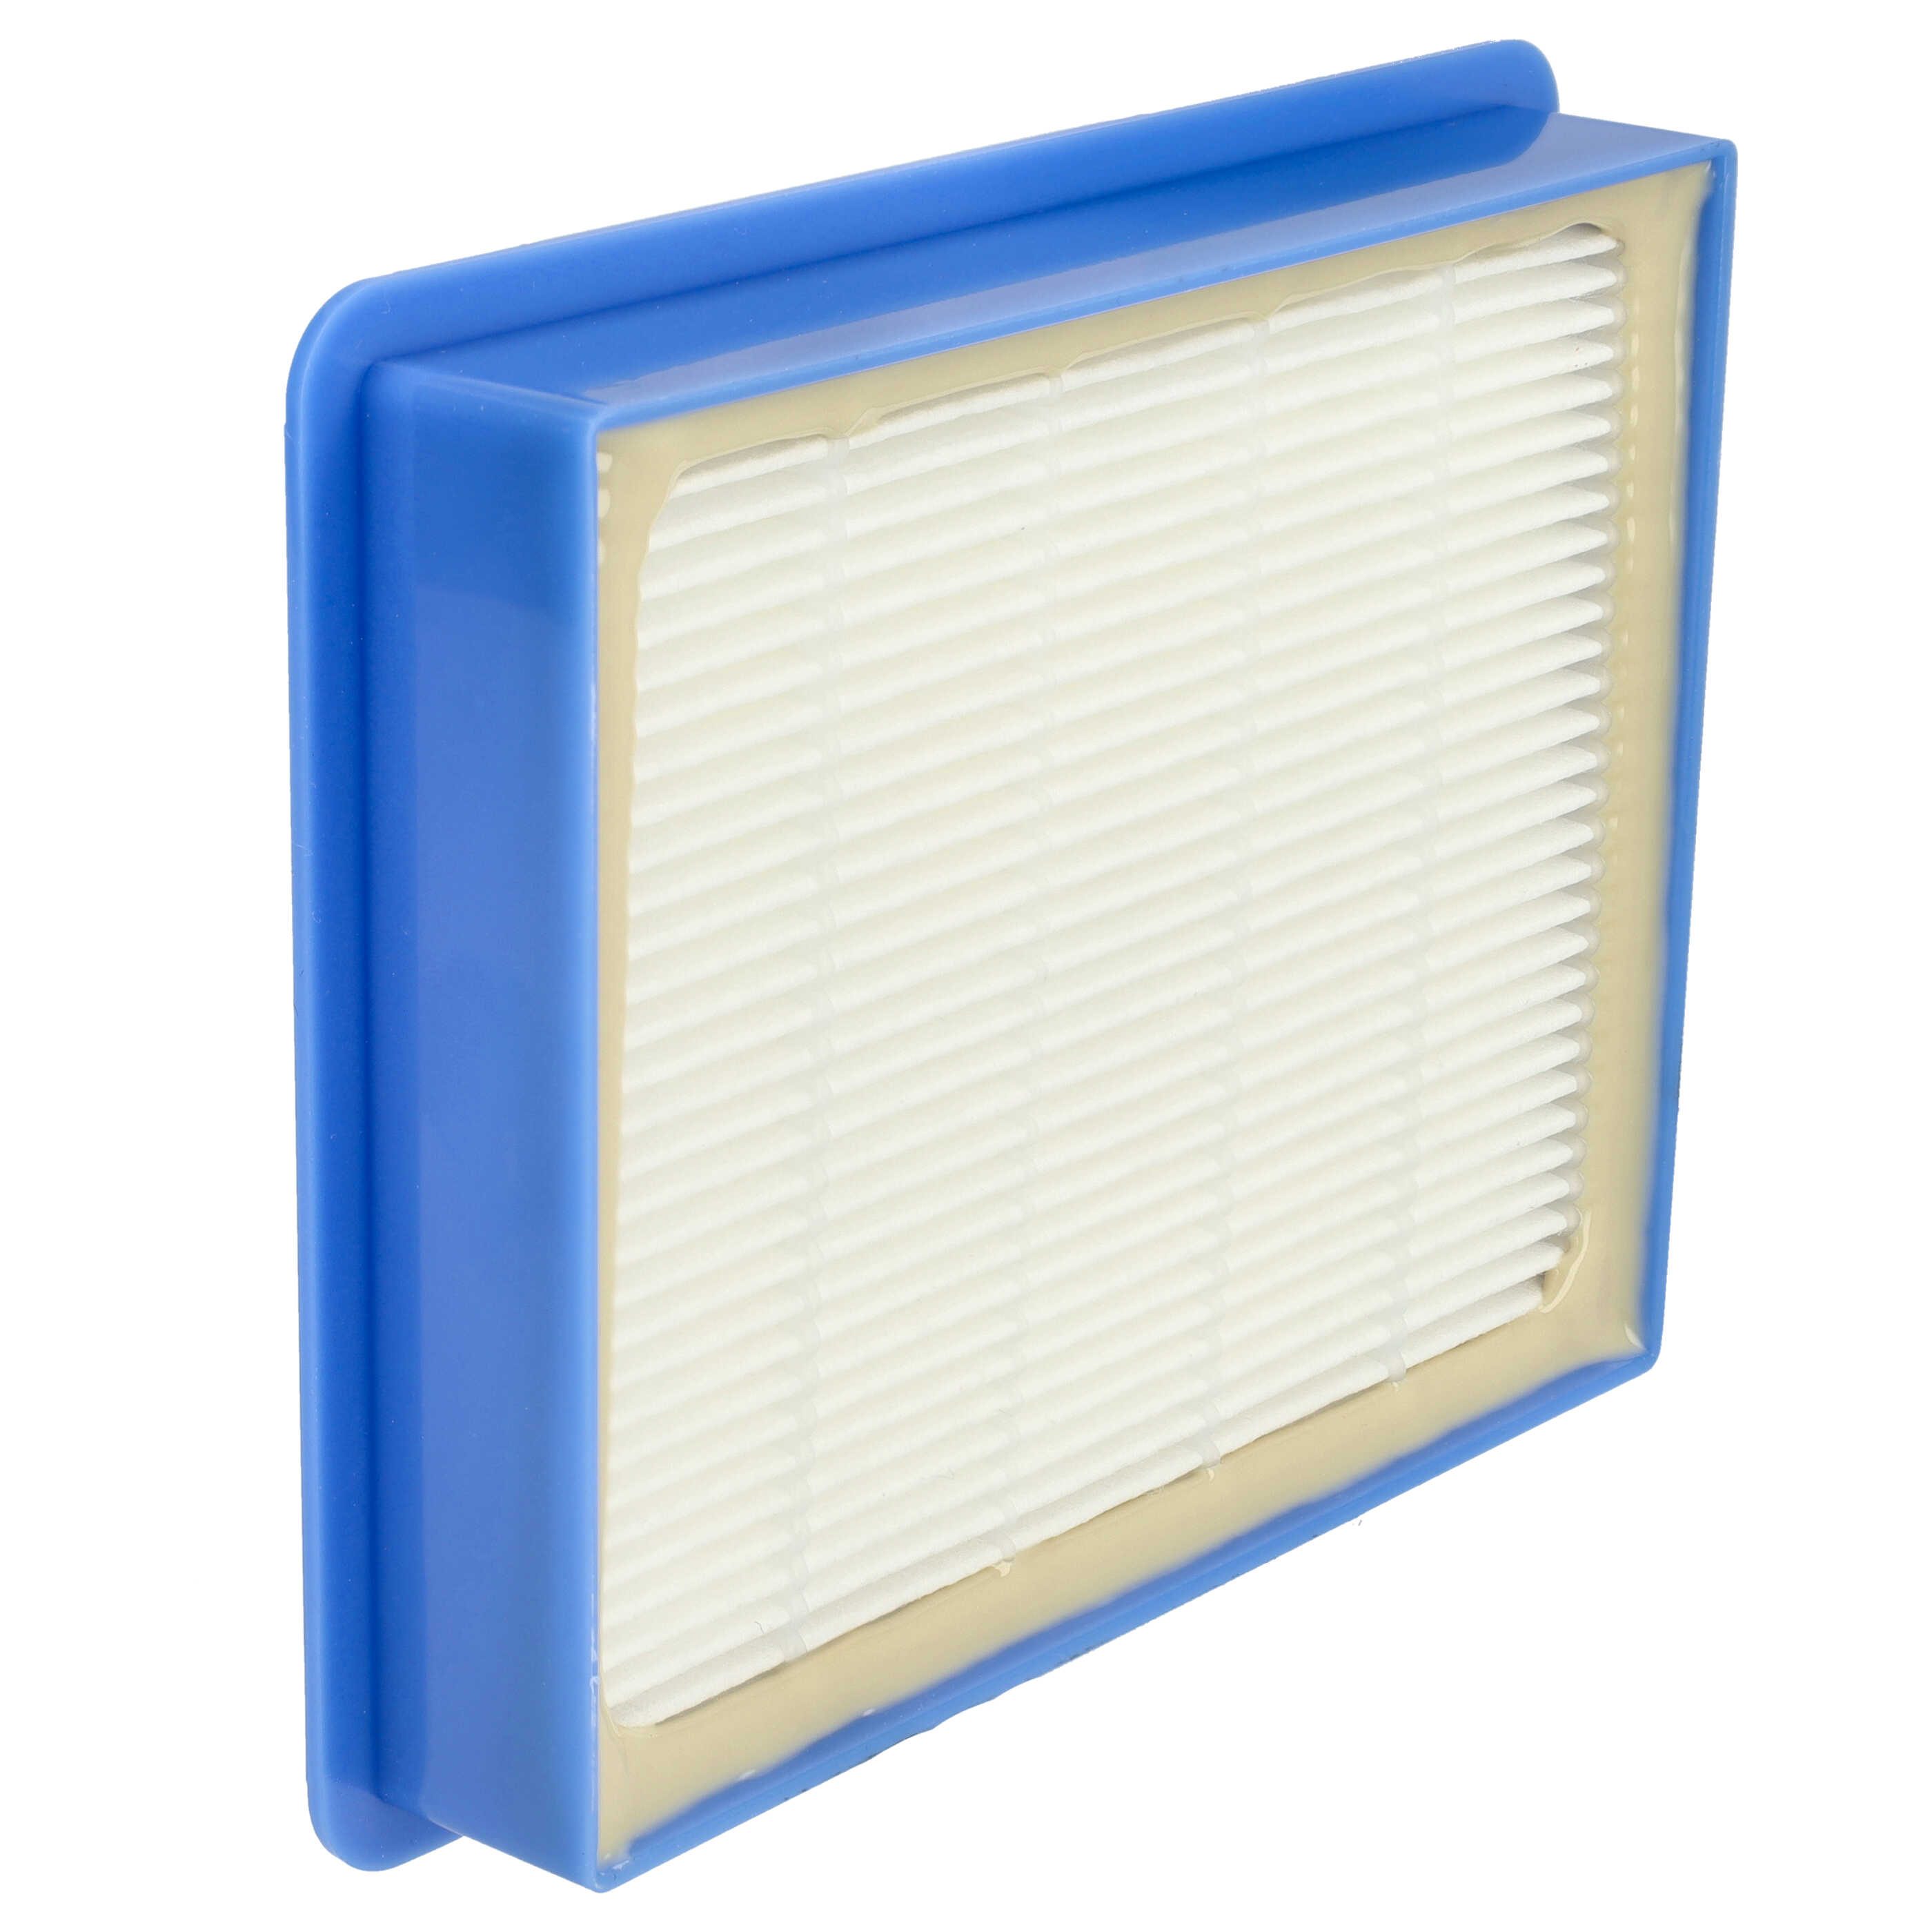 1x HEPA filter replaces AEF13W, H13, AEF 13 W for PhilipsVacuum Cleaner